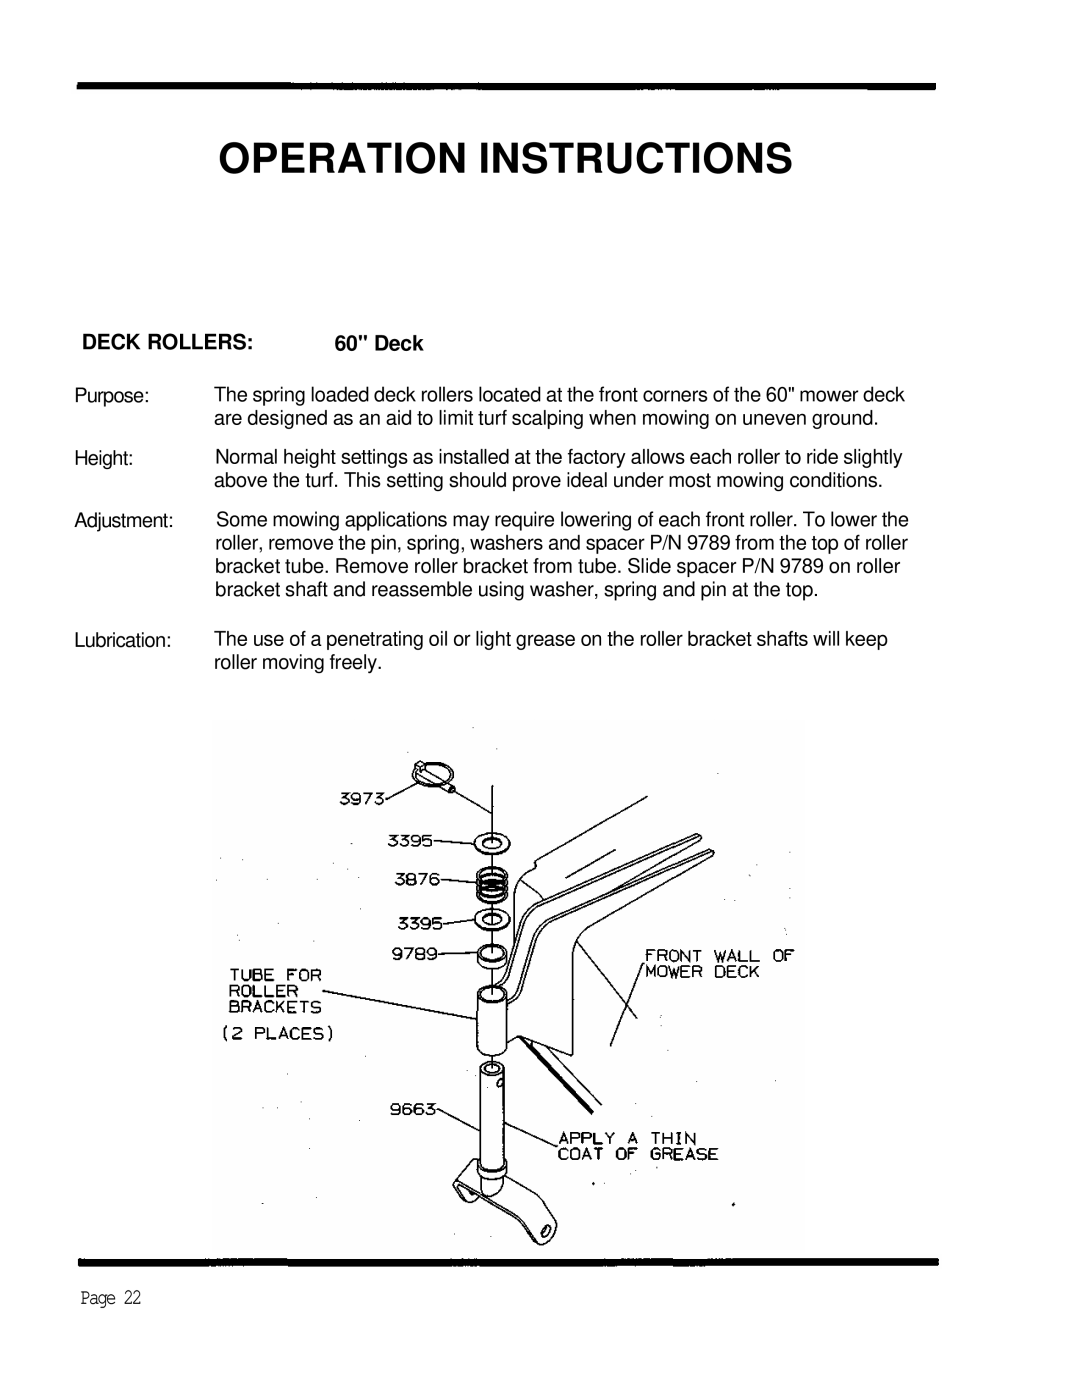 Dixon 5000 Series manual Operation Instructions, Page, Deck Rollers 